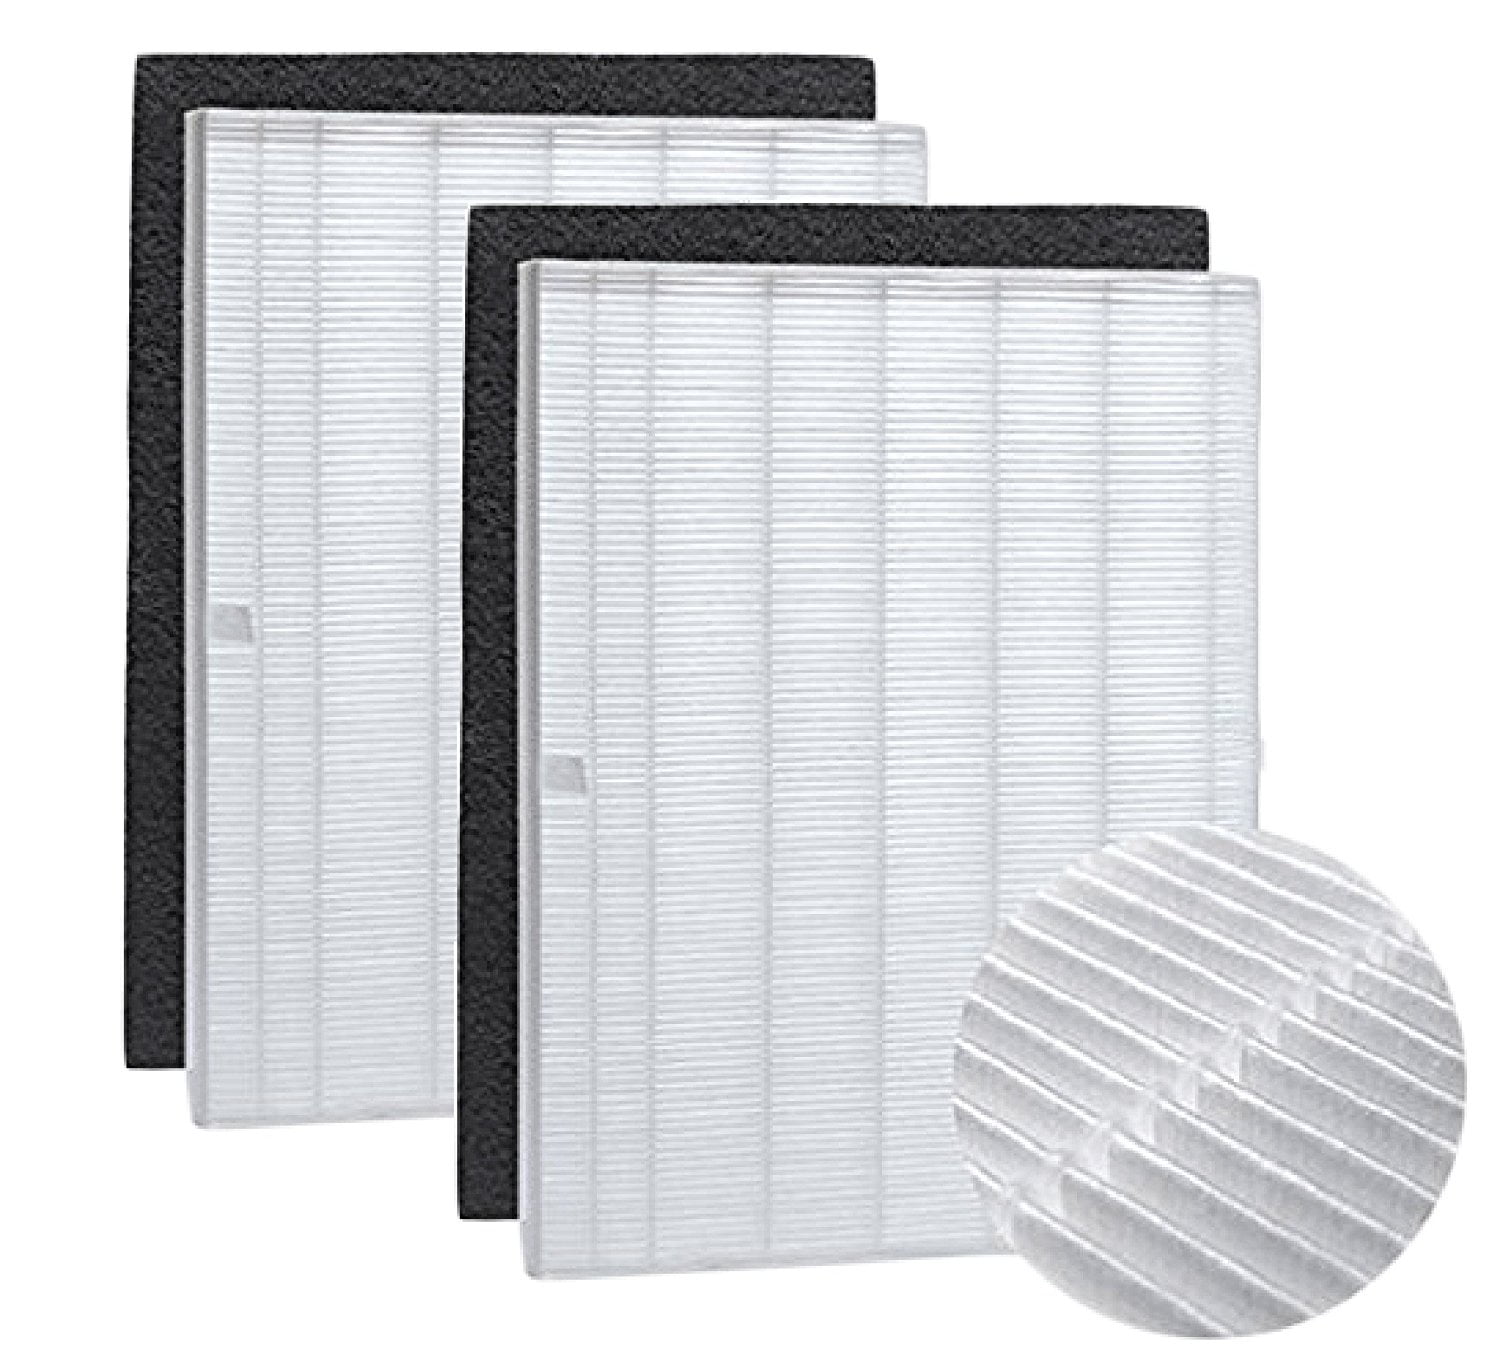 PlasmaWave Size 21 4 Pack Carbon Replacement Filters for Winix 115115 